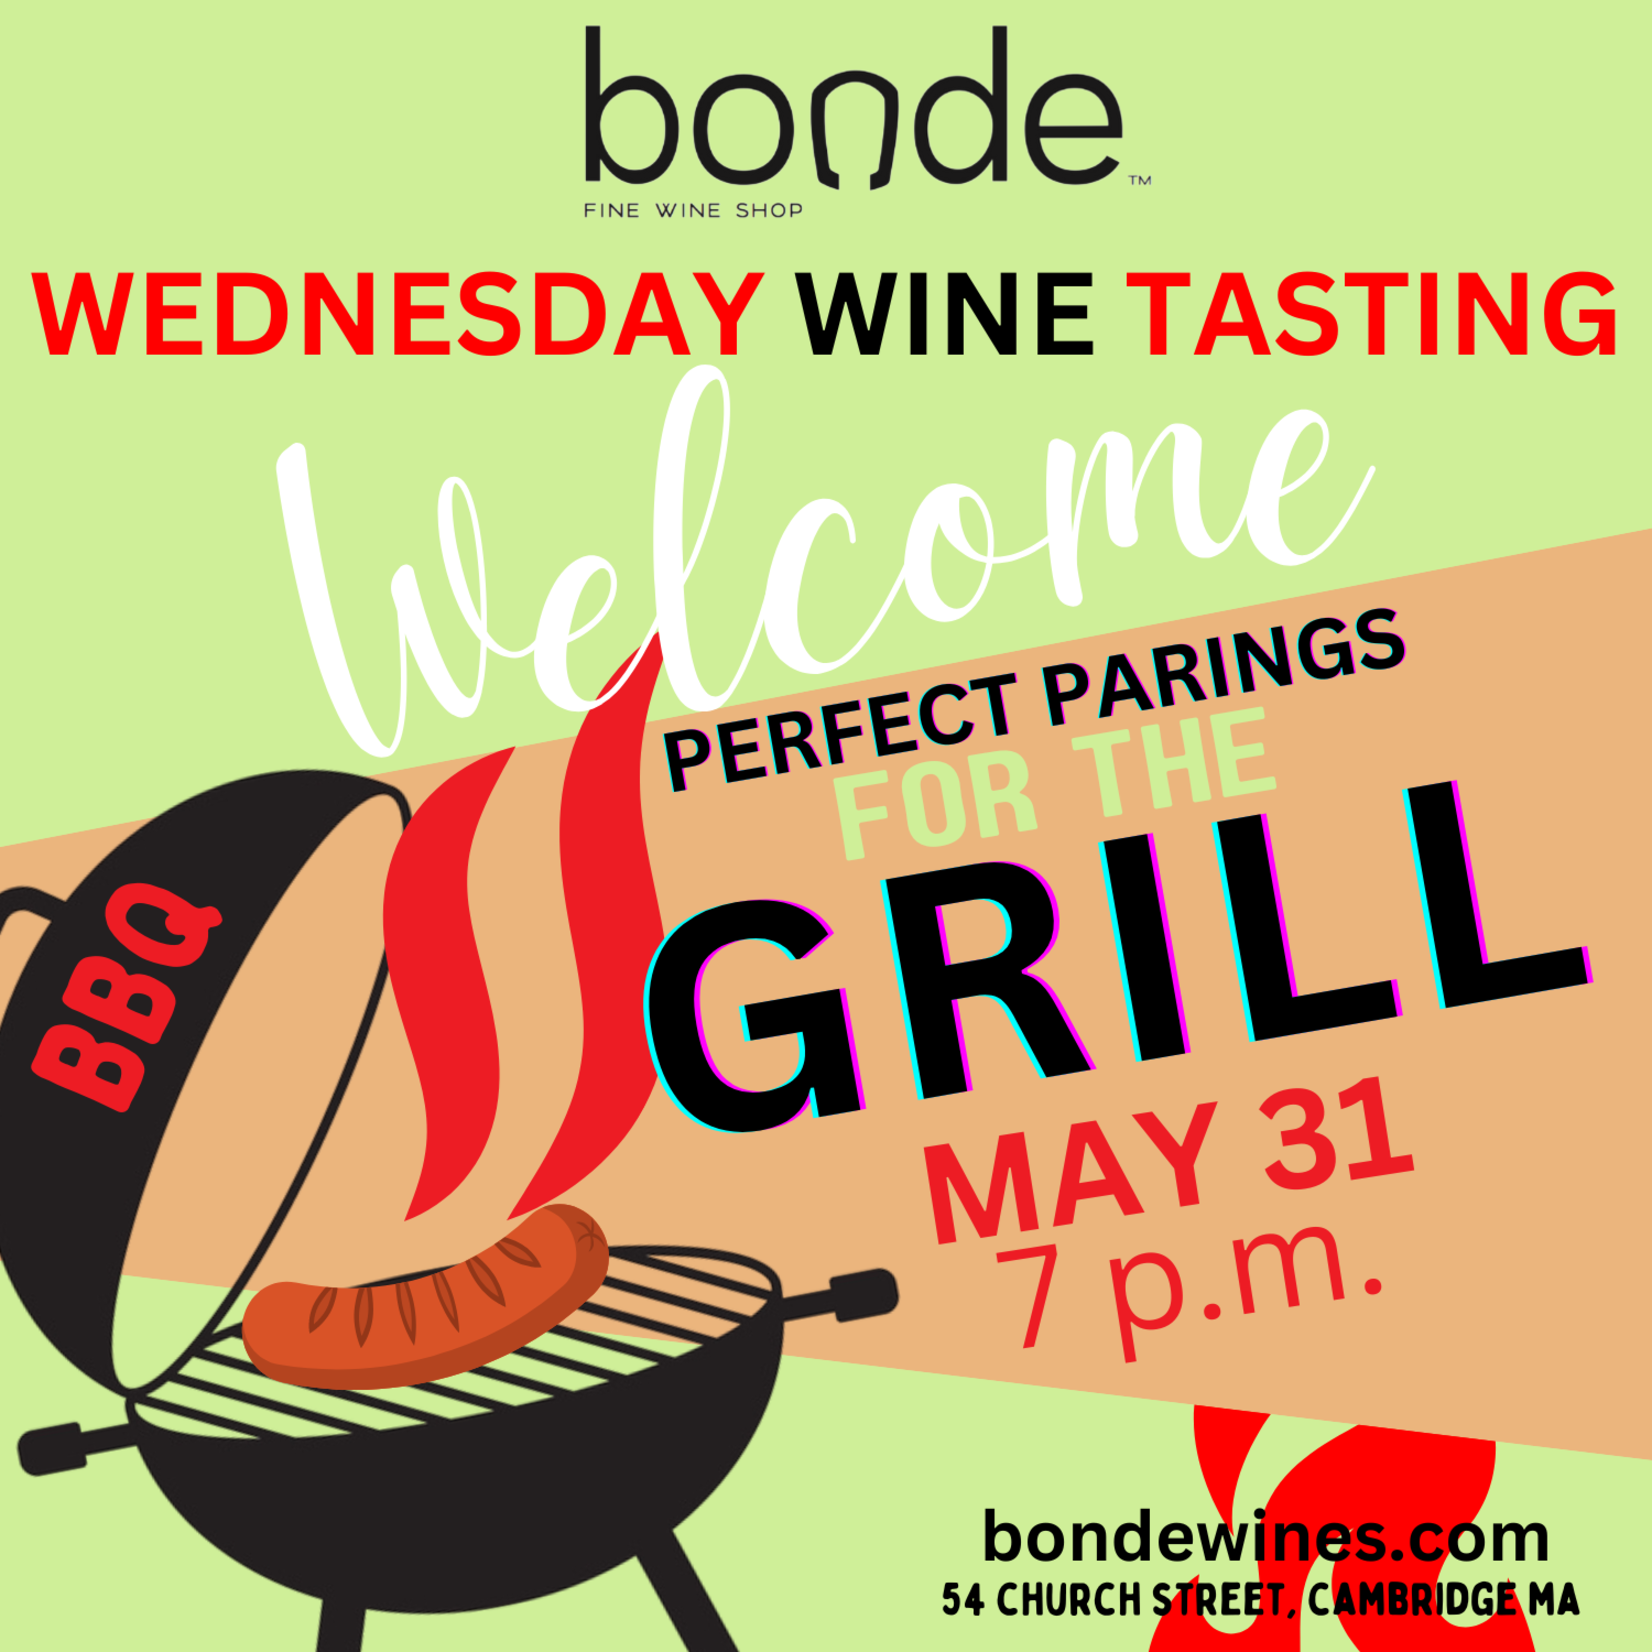 Perfect Grill Pairings - Wine Tasting & Class - Wednesday May 31, 7:00 p.m.